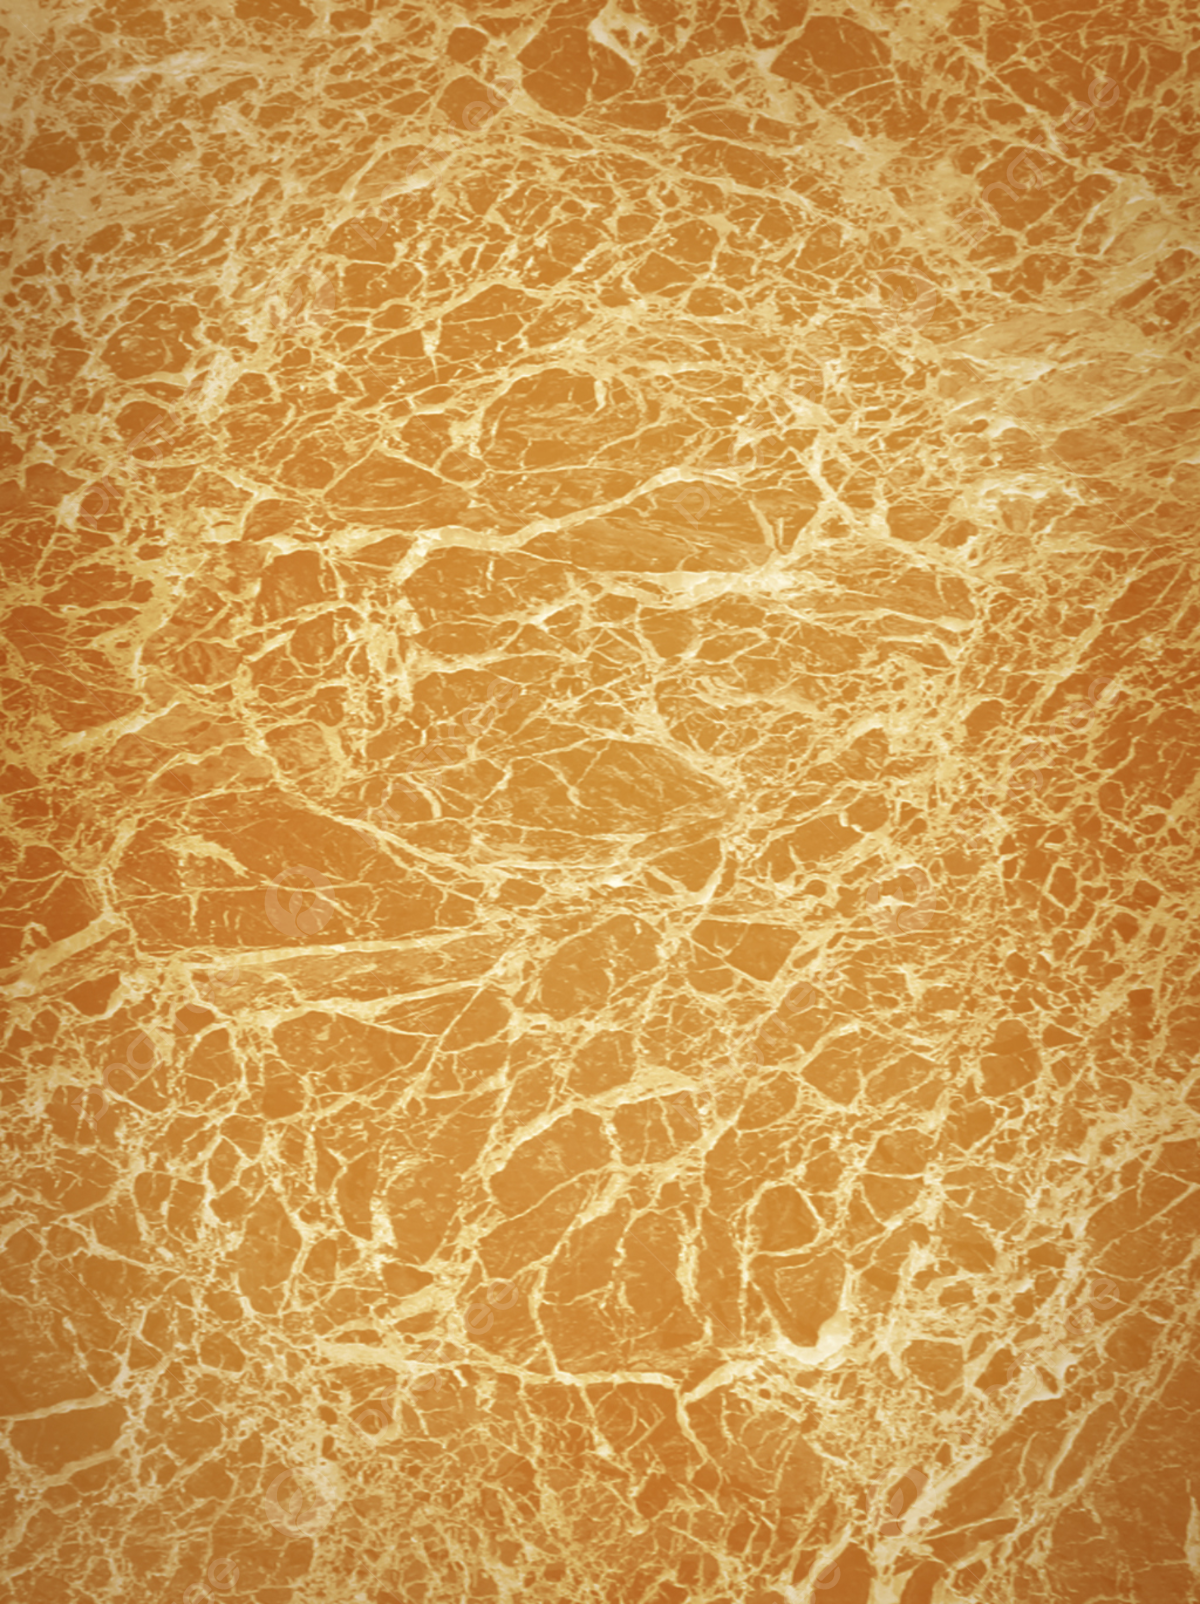 Orange Marble Golden Series Texture Advertising Background Wallpaper Image For Free Download